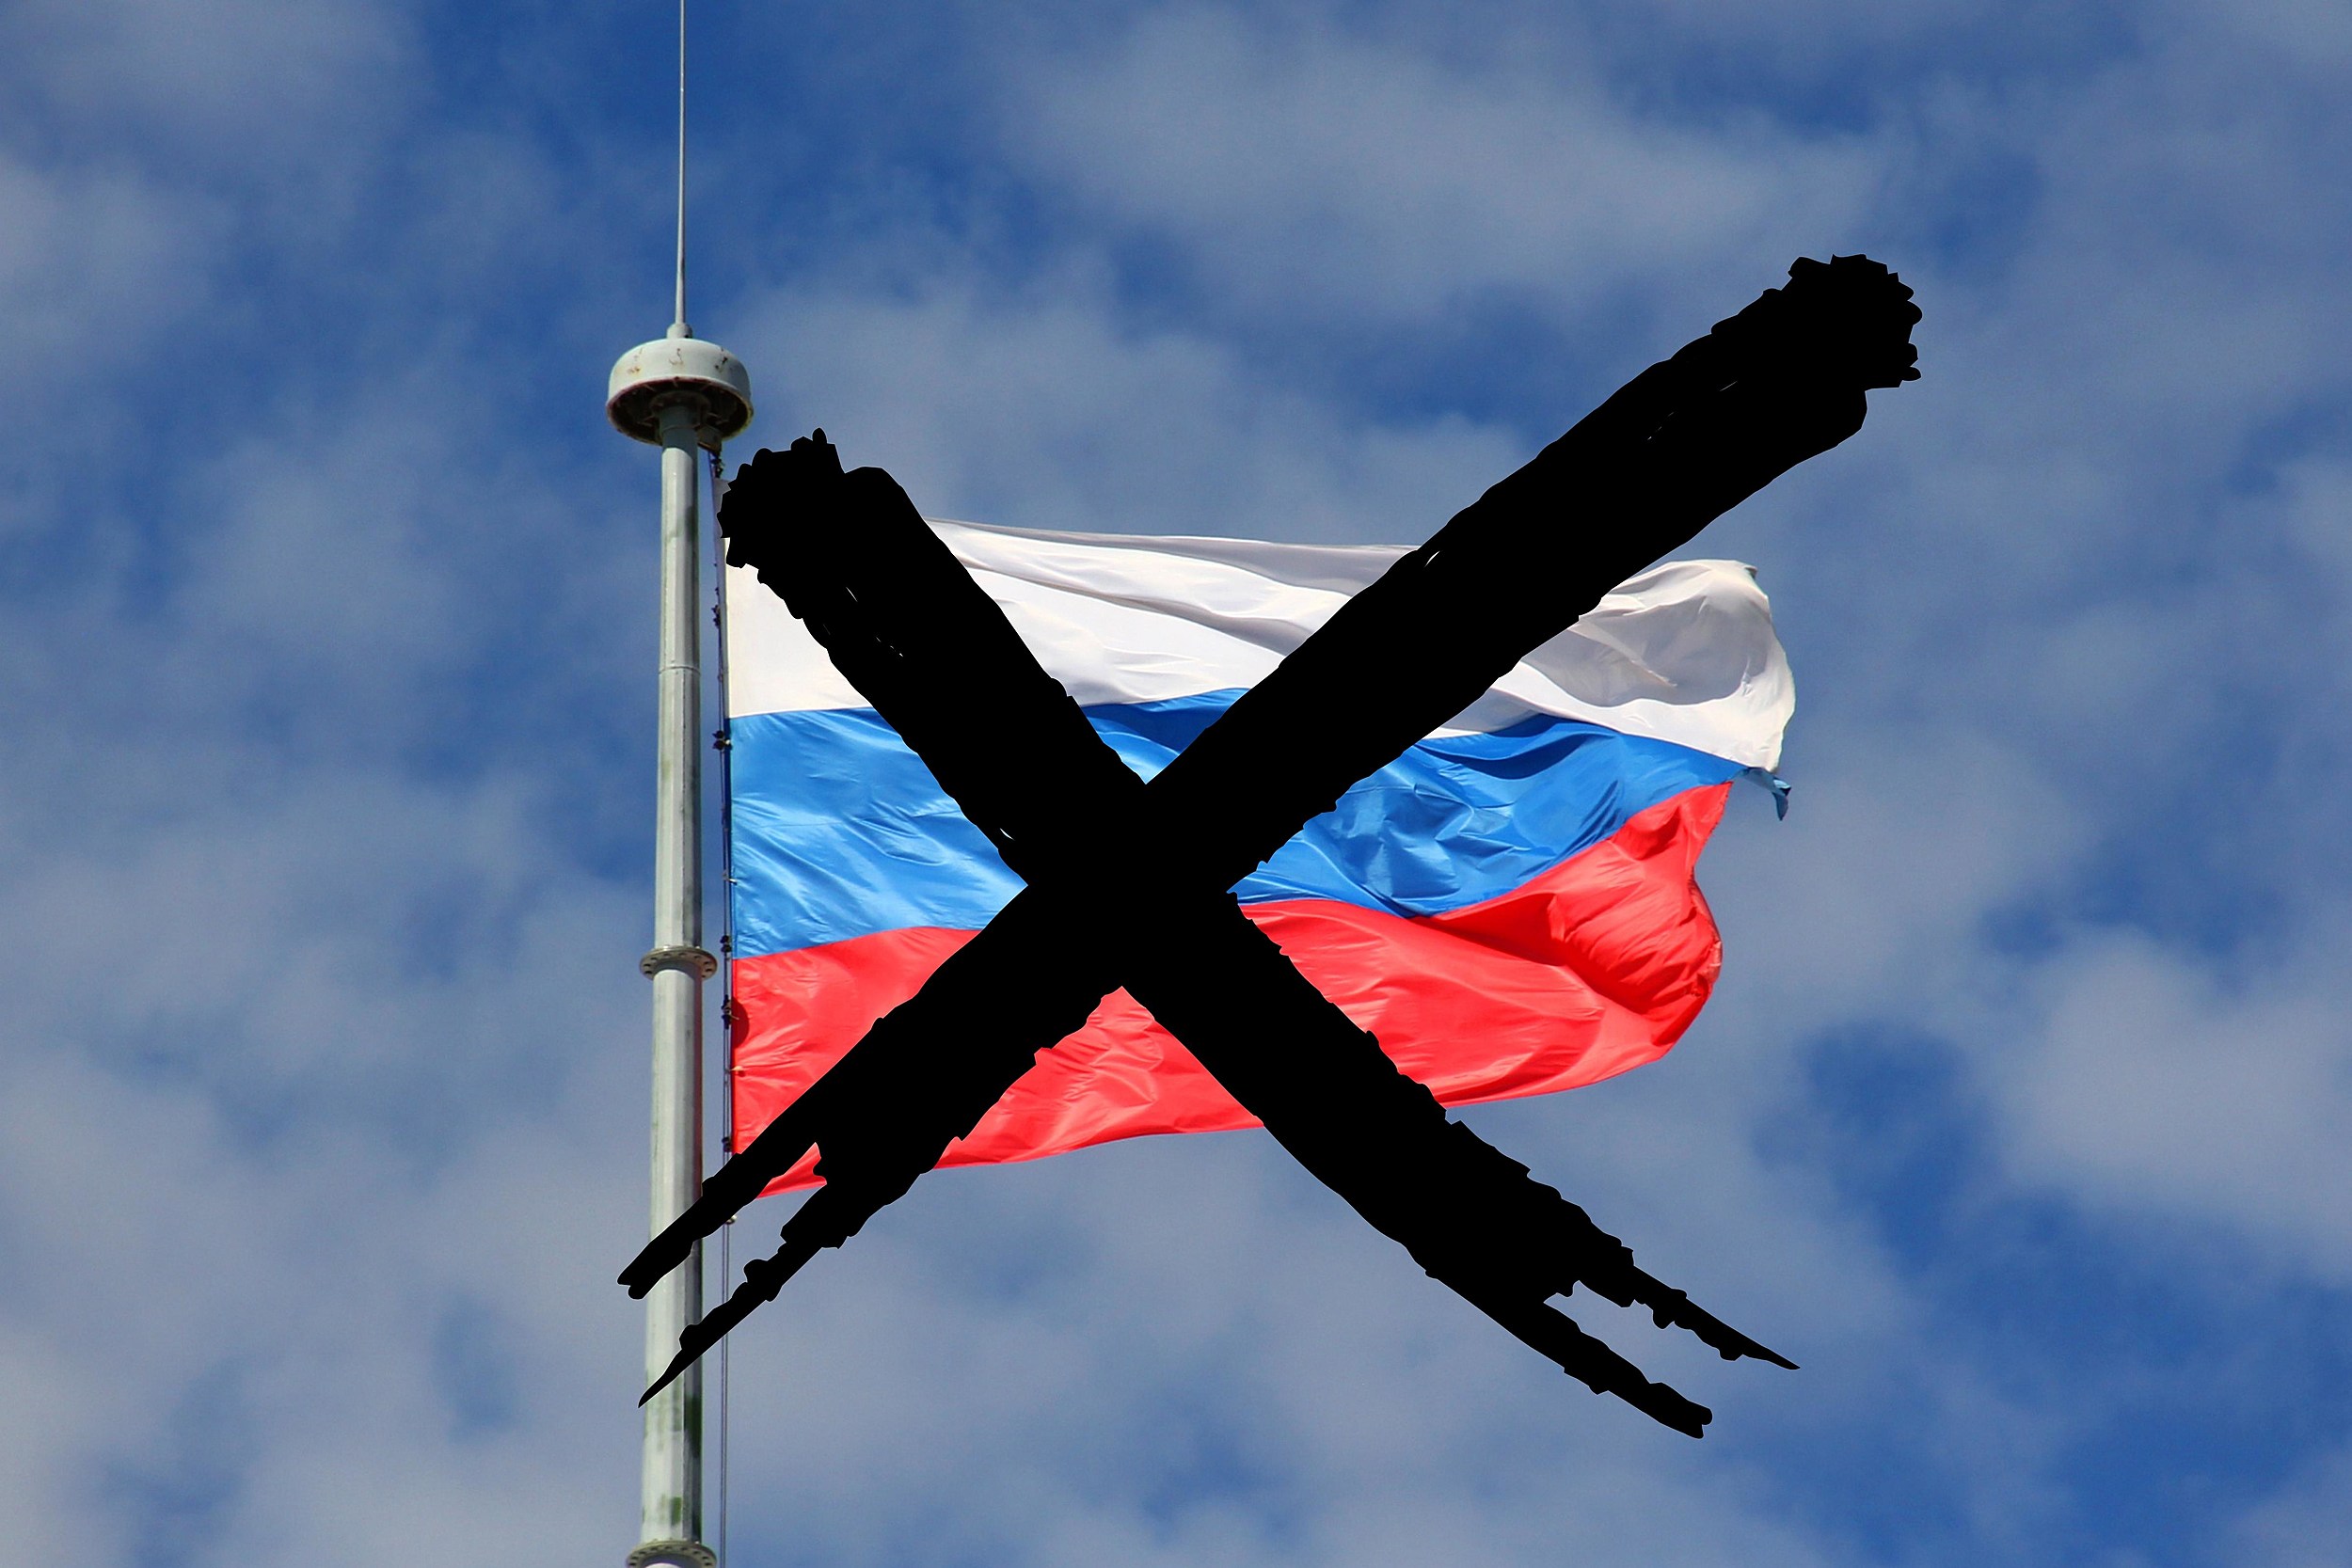 The Russian flag keeps getting stolen from the parkway. Now